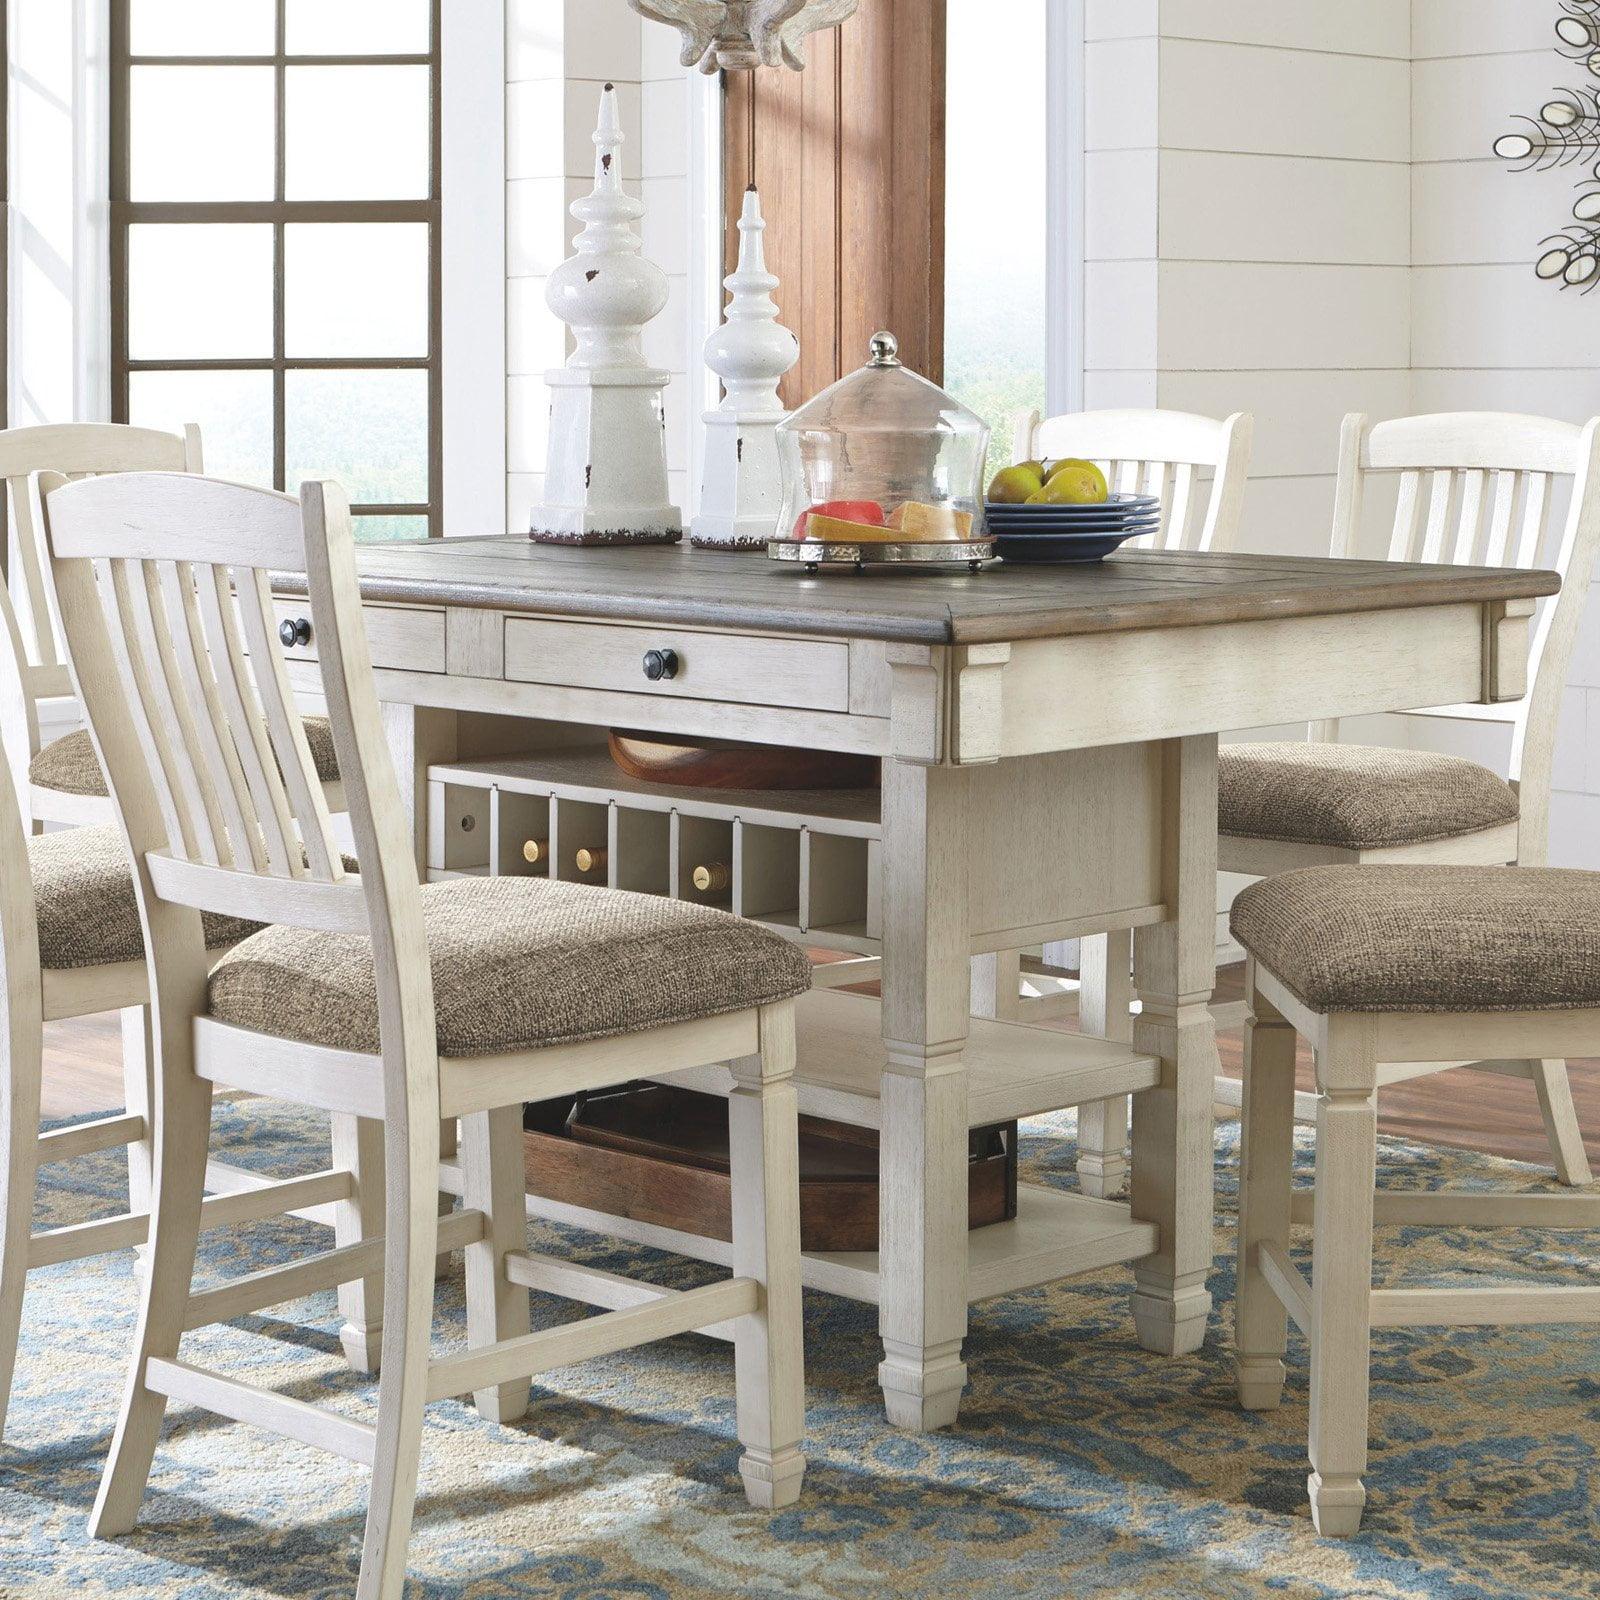 Cottage Charm Antique White Extendable Counter Height Dining Set